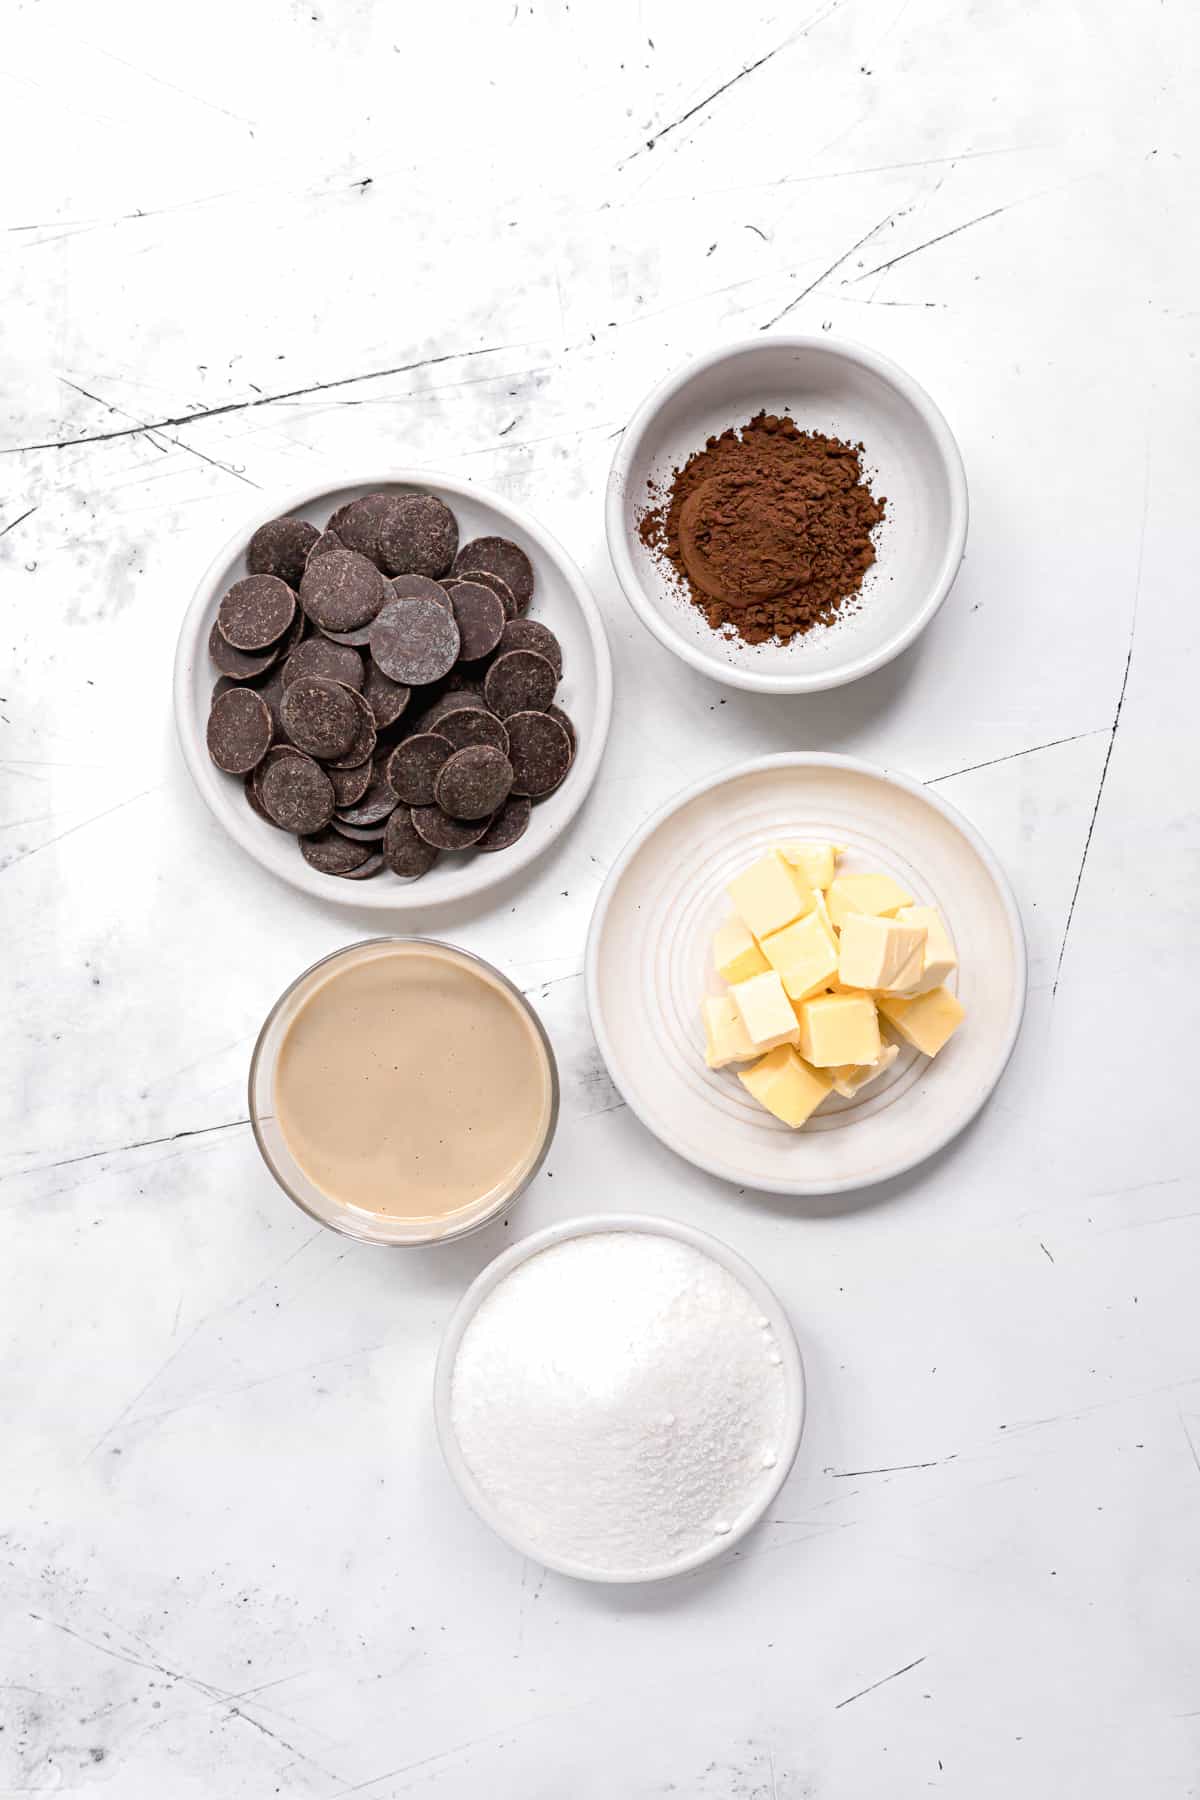 ingredients for the chocolate tahini filling.